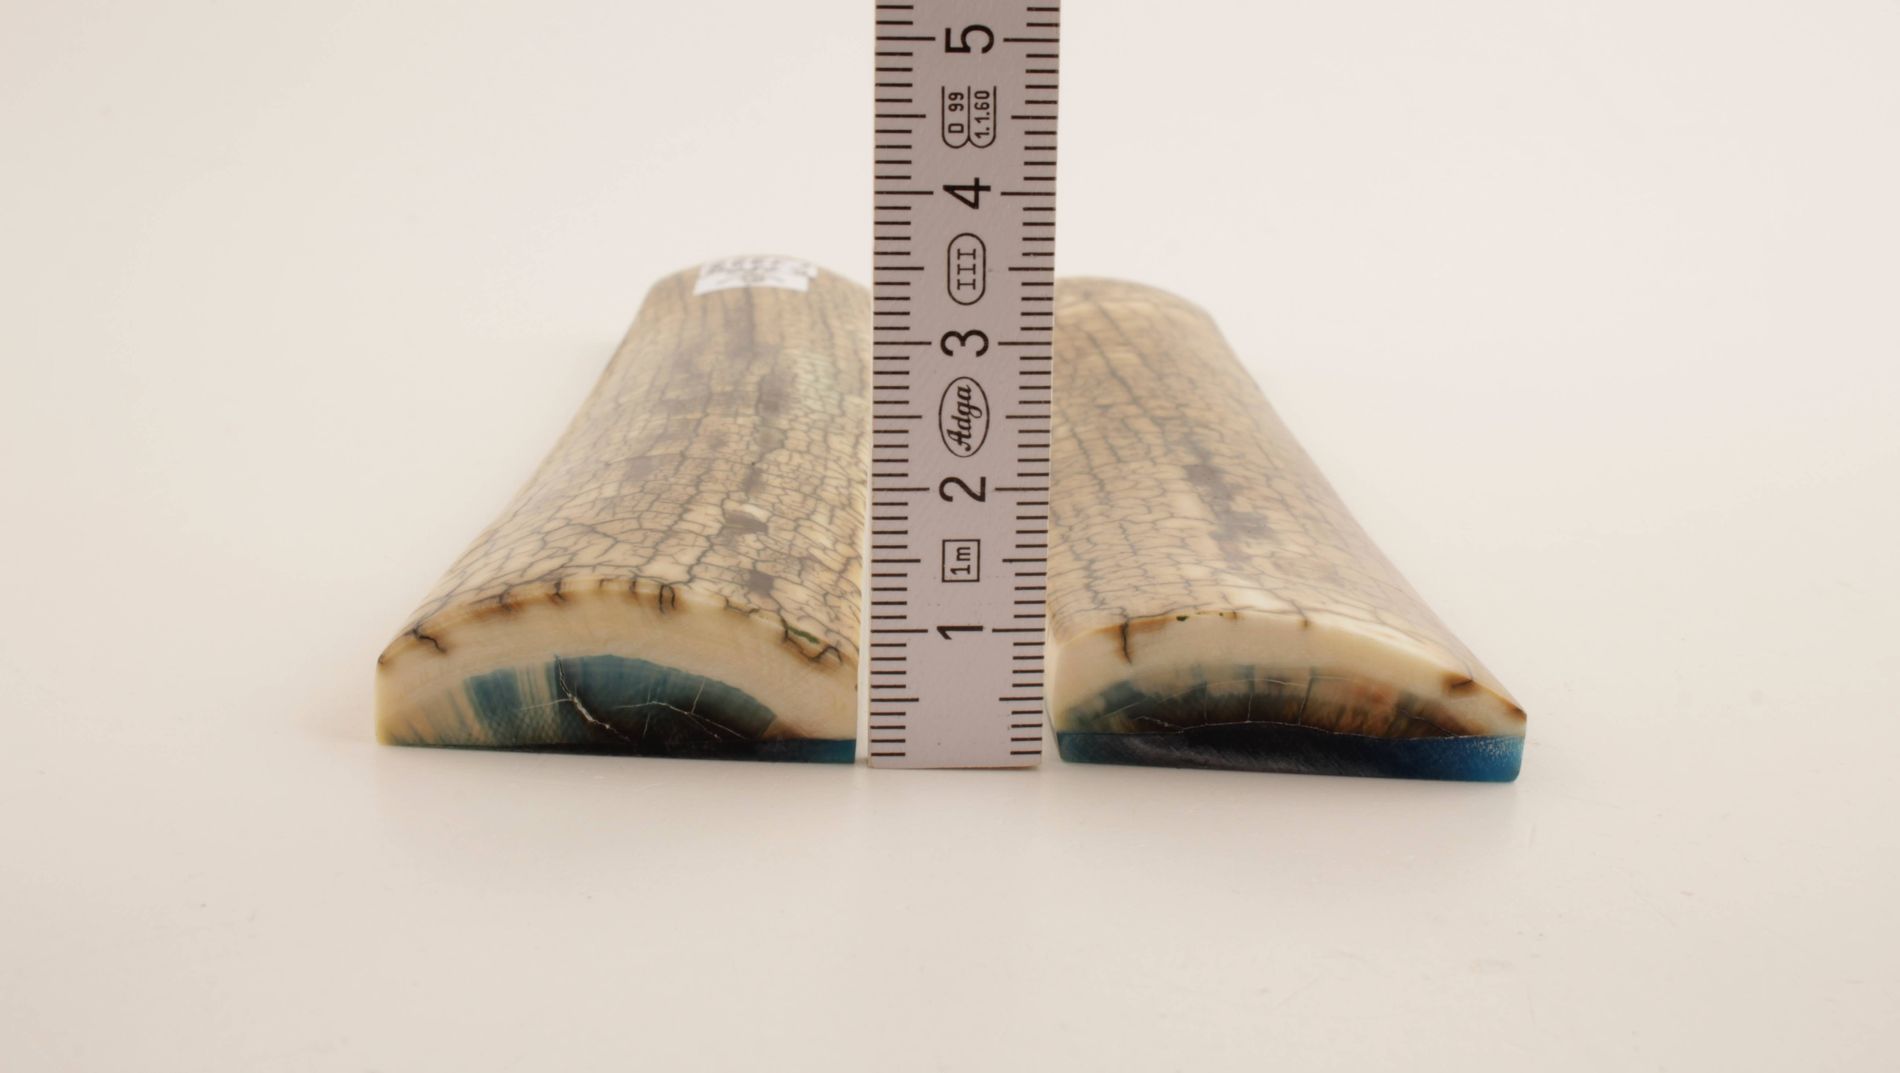 Stabilized mammoth bark scales